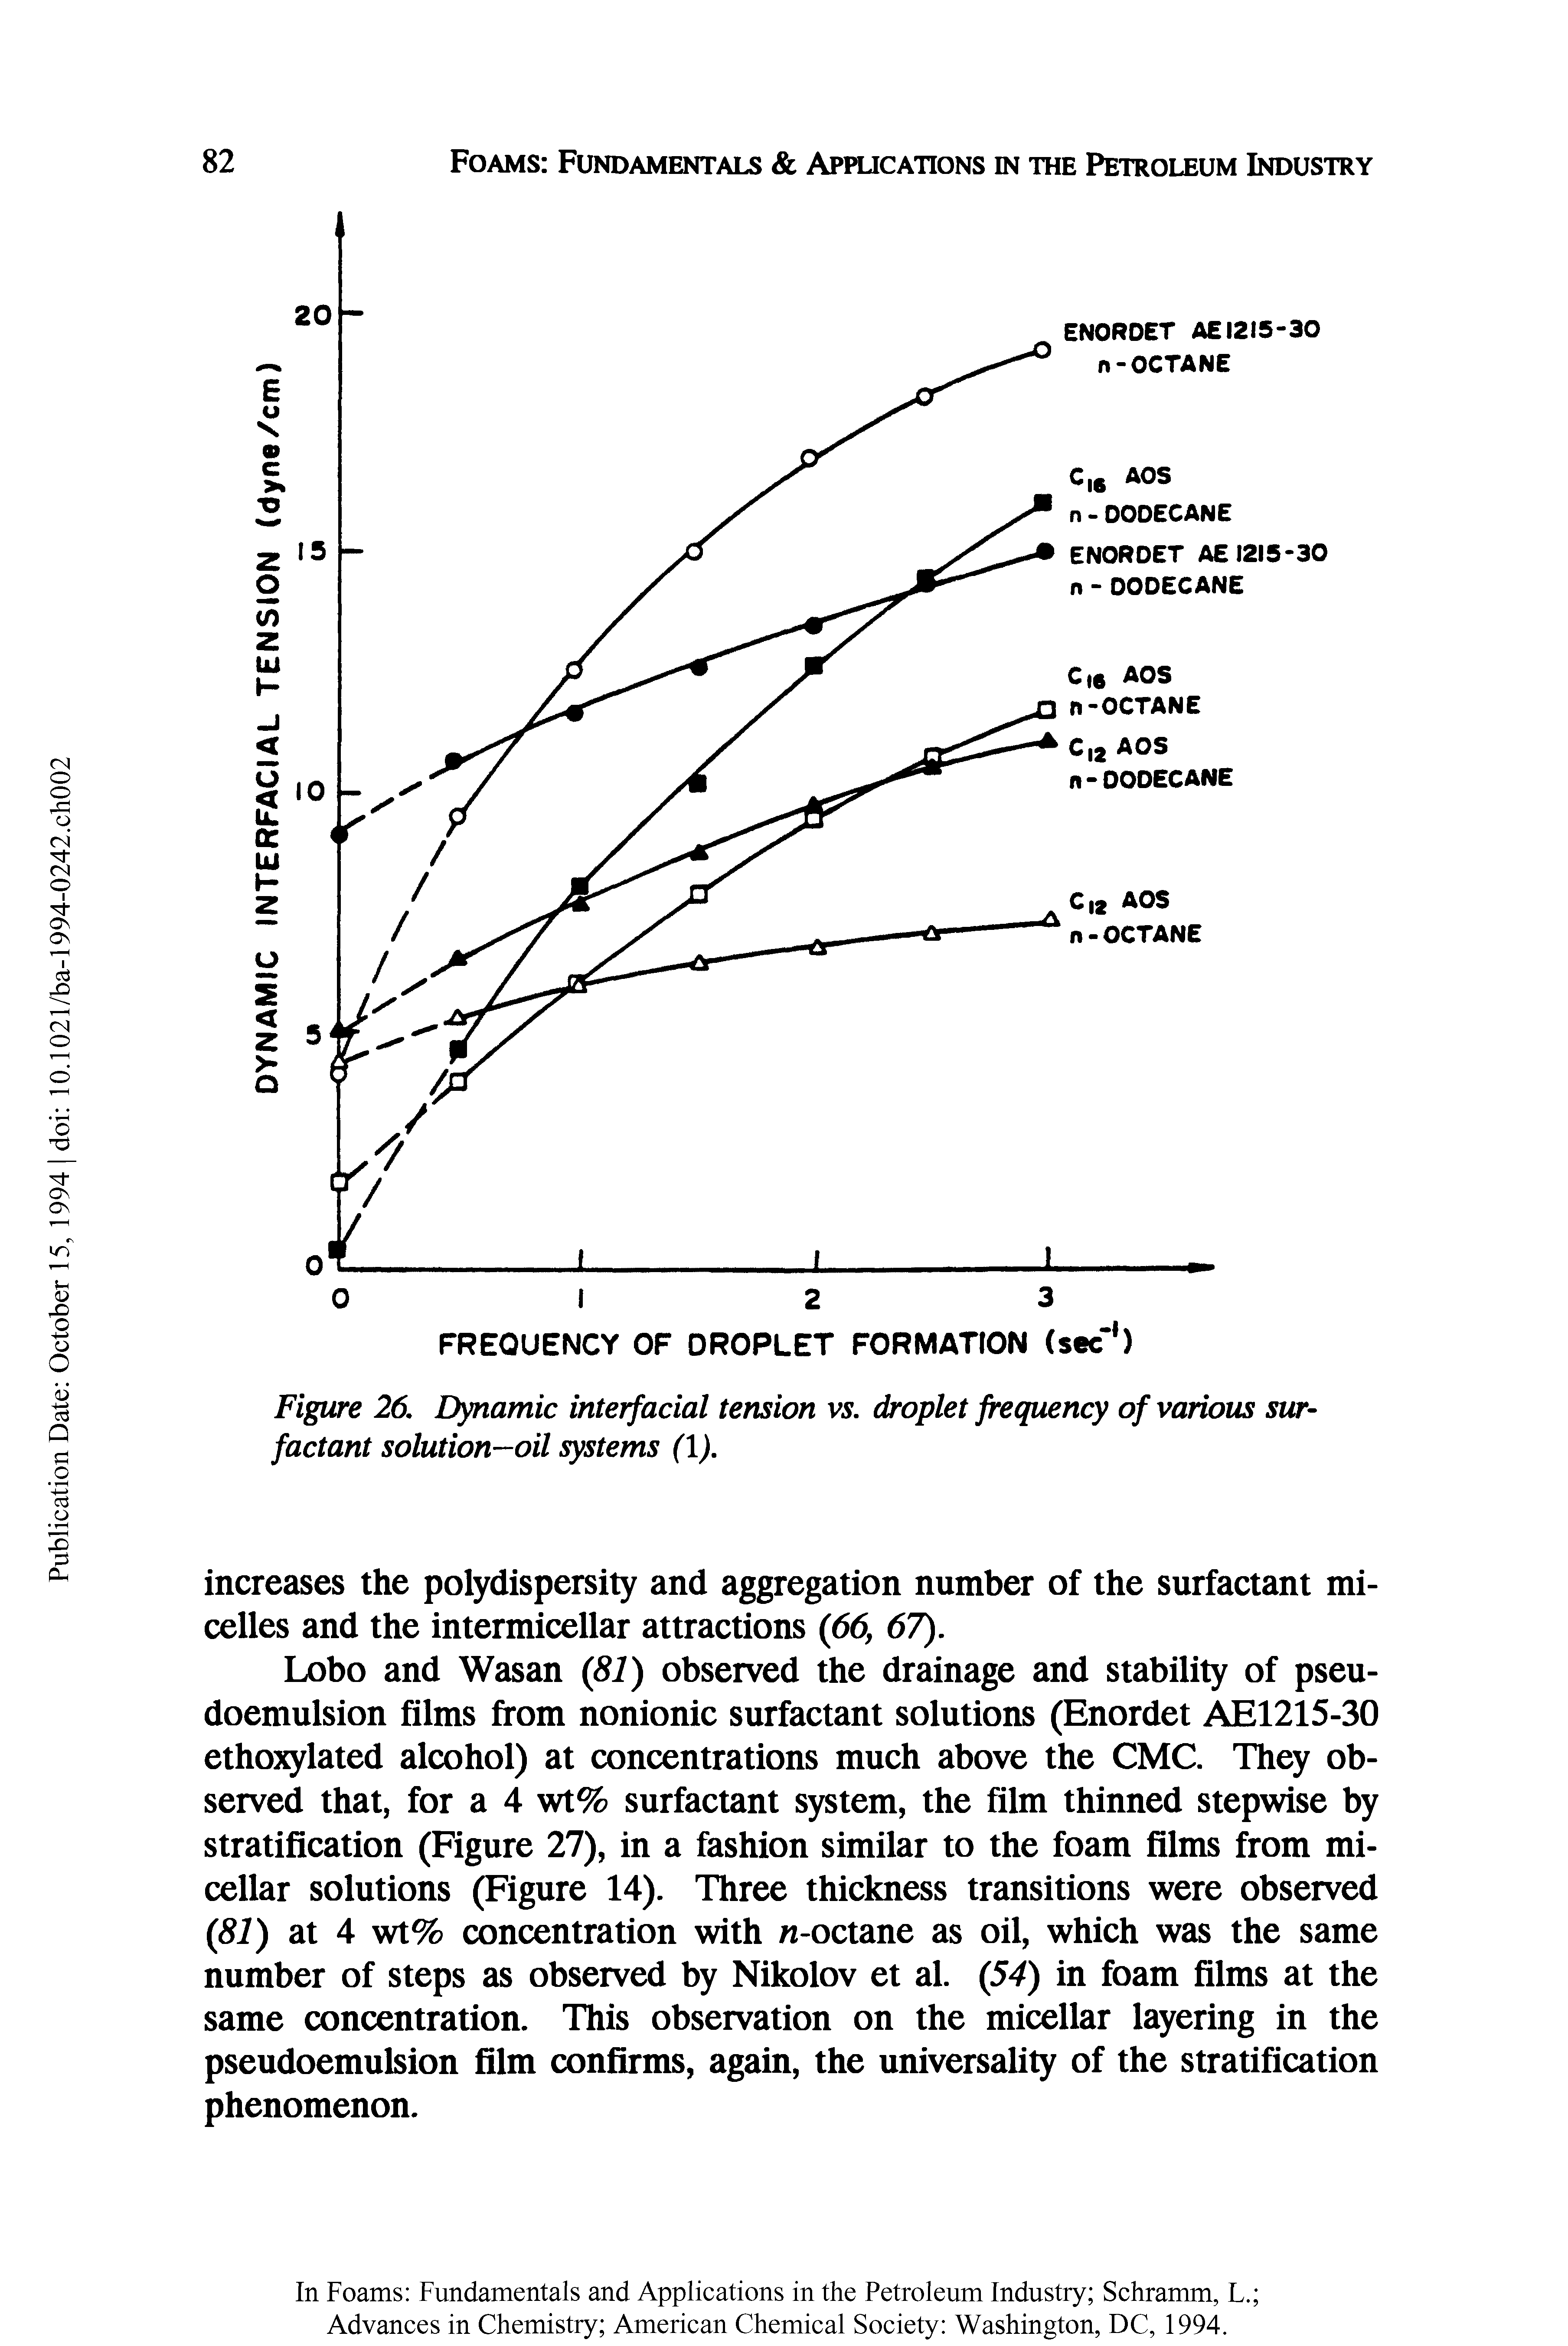 Figure 26. Dynamic interfacial tension vs. droplet frequency of various surfactant solution—oil systems (l).